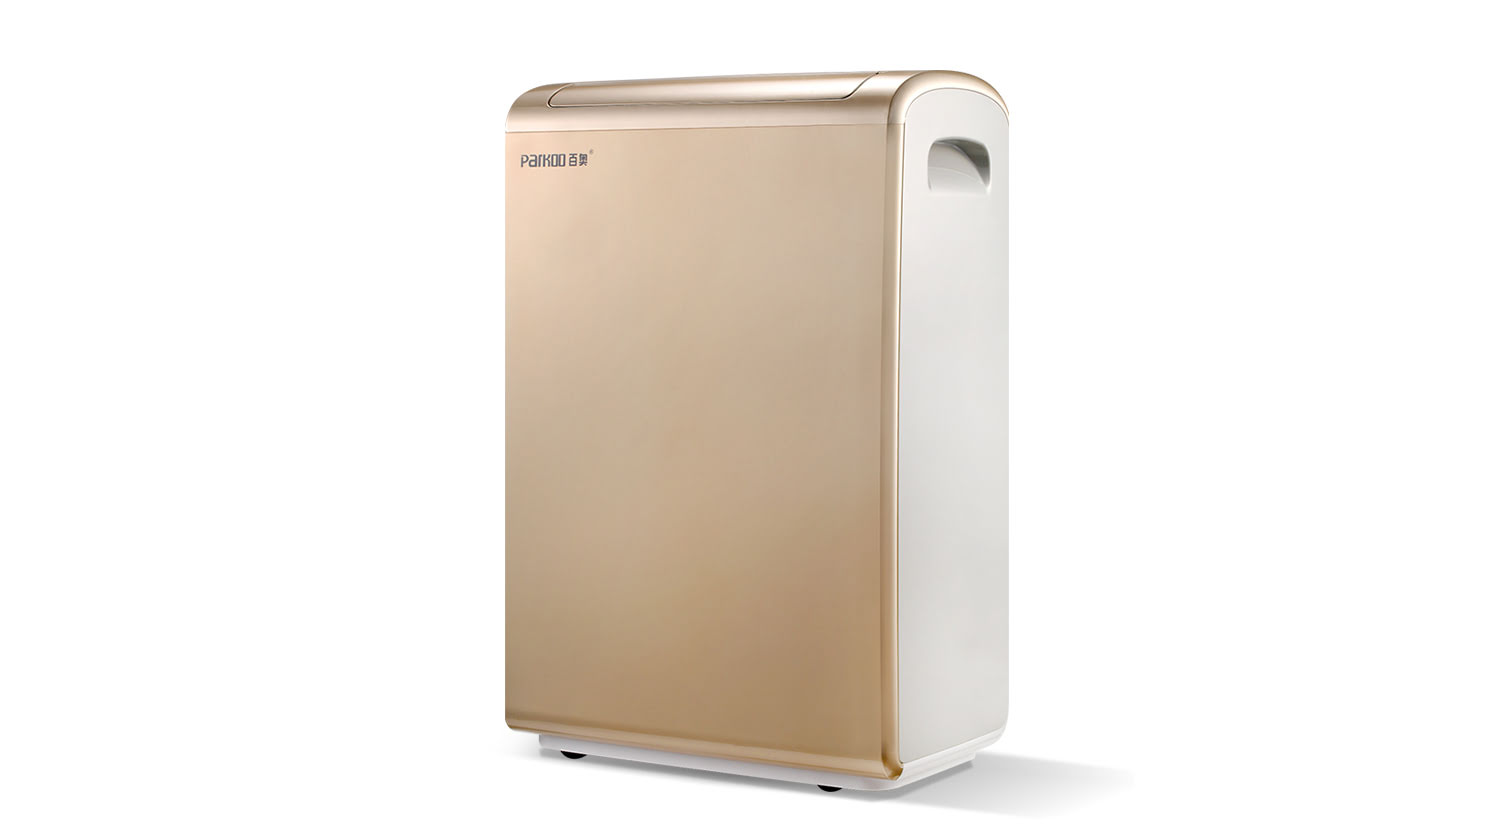 A dehumidifier that doesn't produce water doesn't necessarily mean the machine is broken